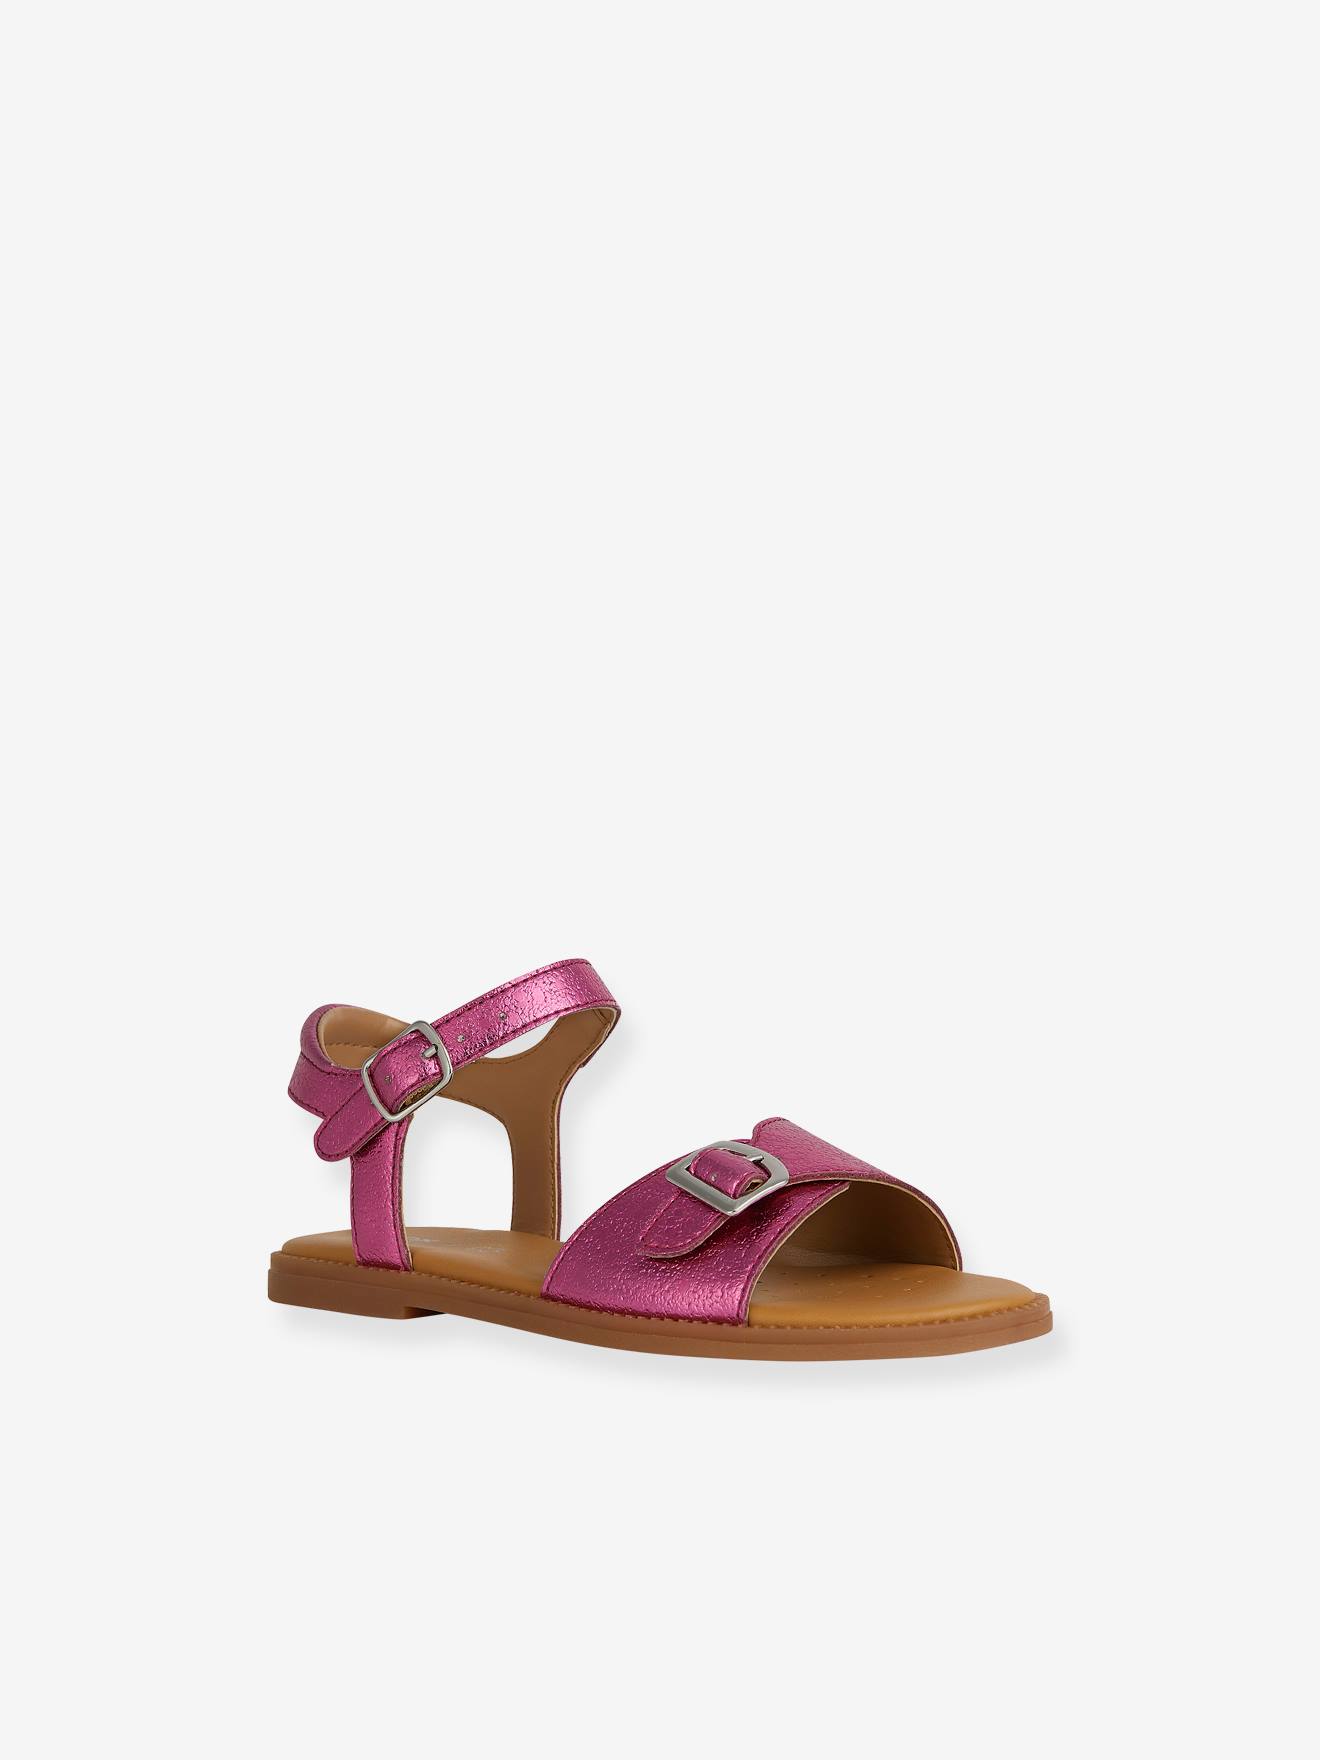 Sandals for Children, J4535 Karly Girl by GEOX(r) fuchsia